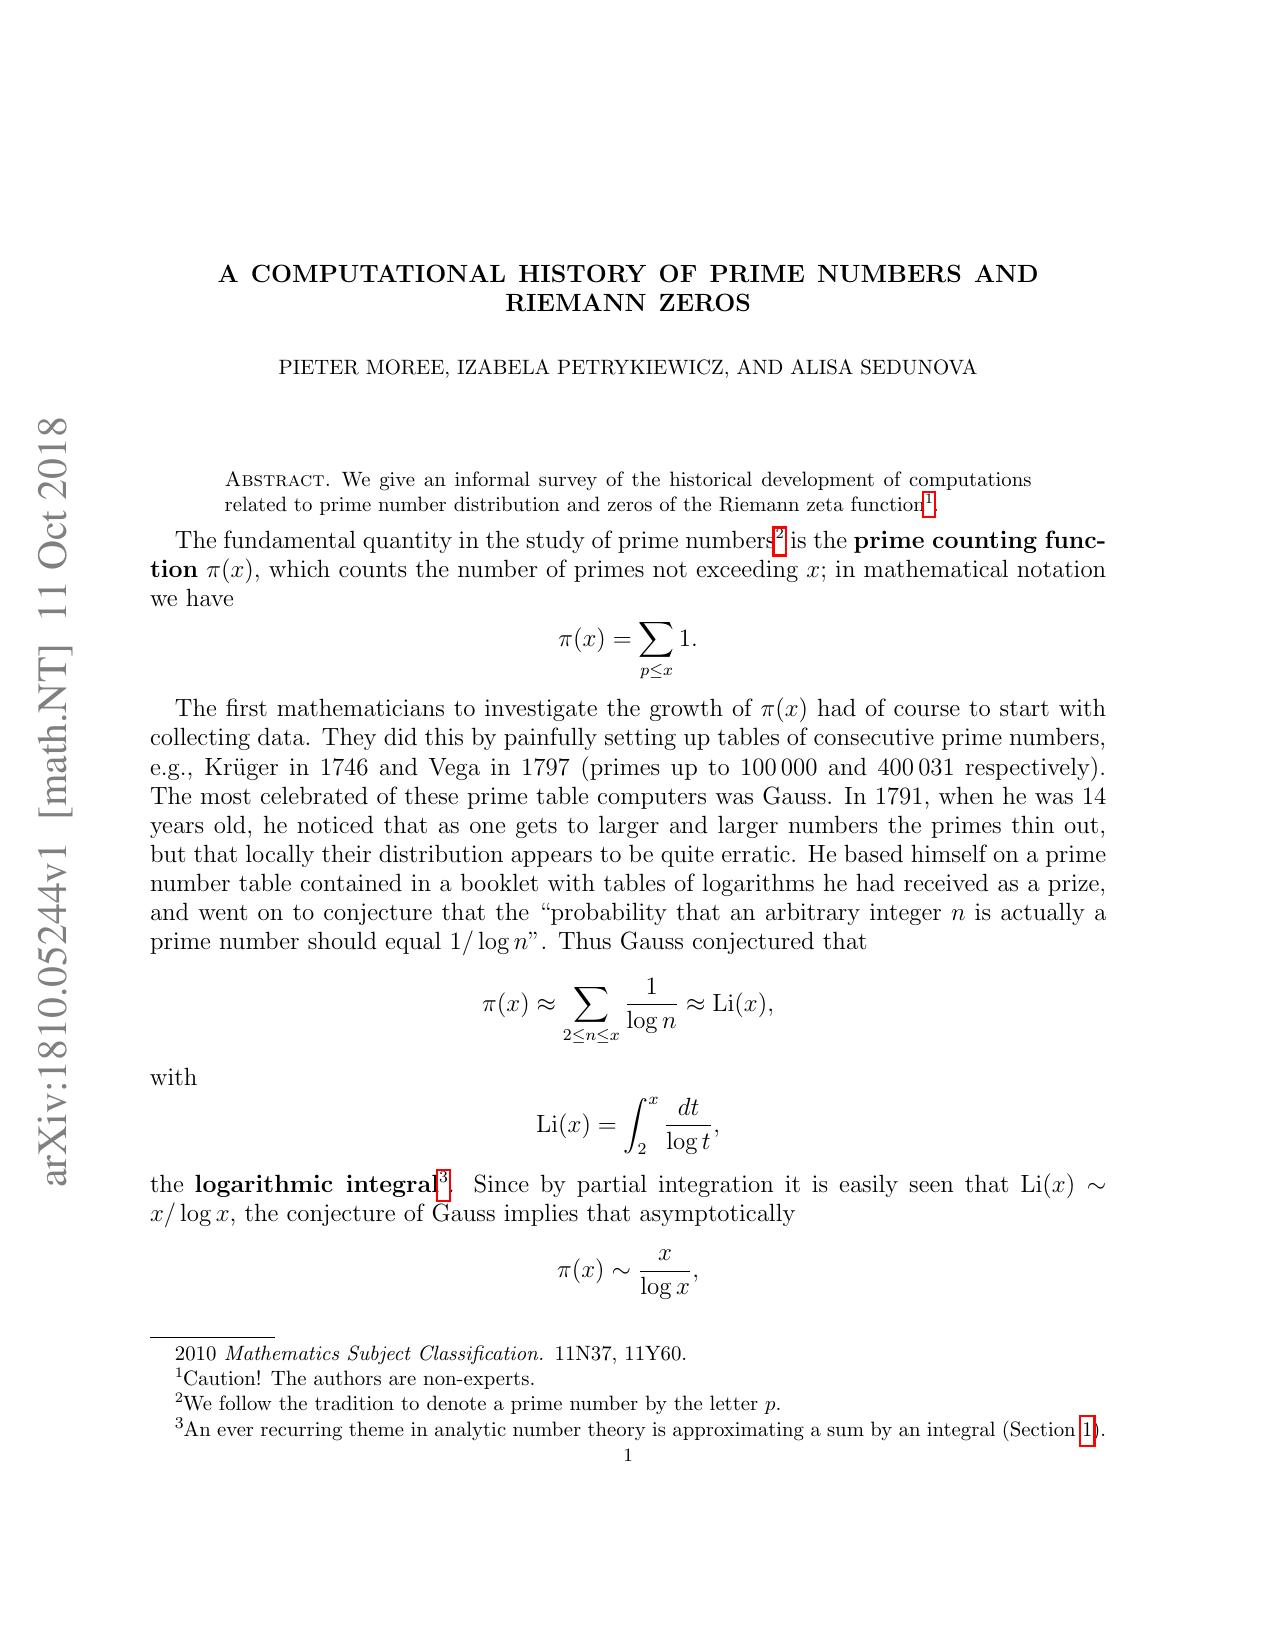 A Computational History Of Prime Numbers & Riemann Zeros - Paper